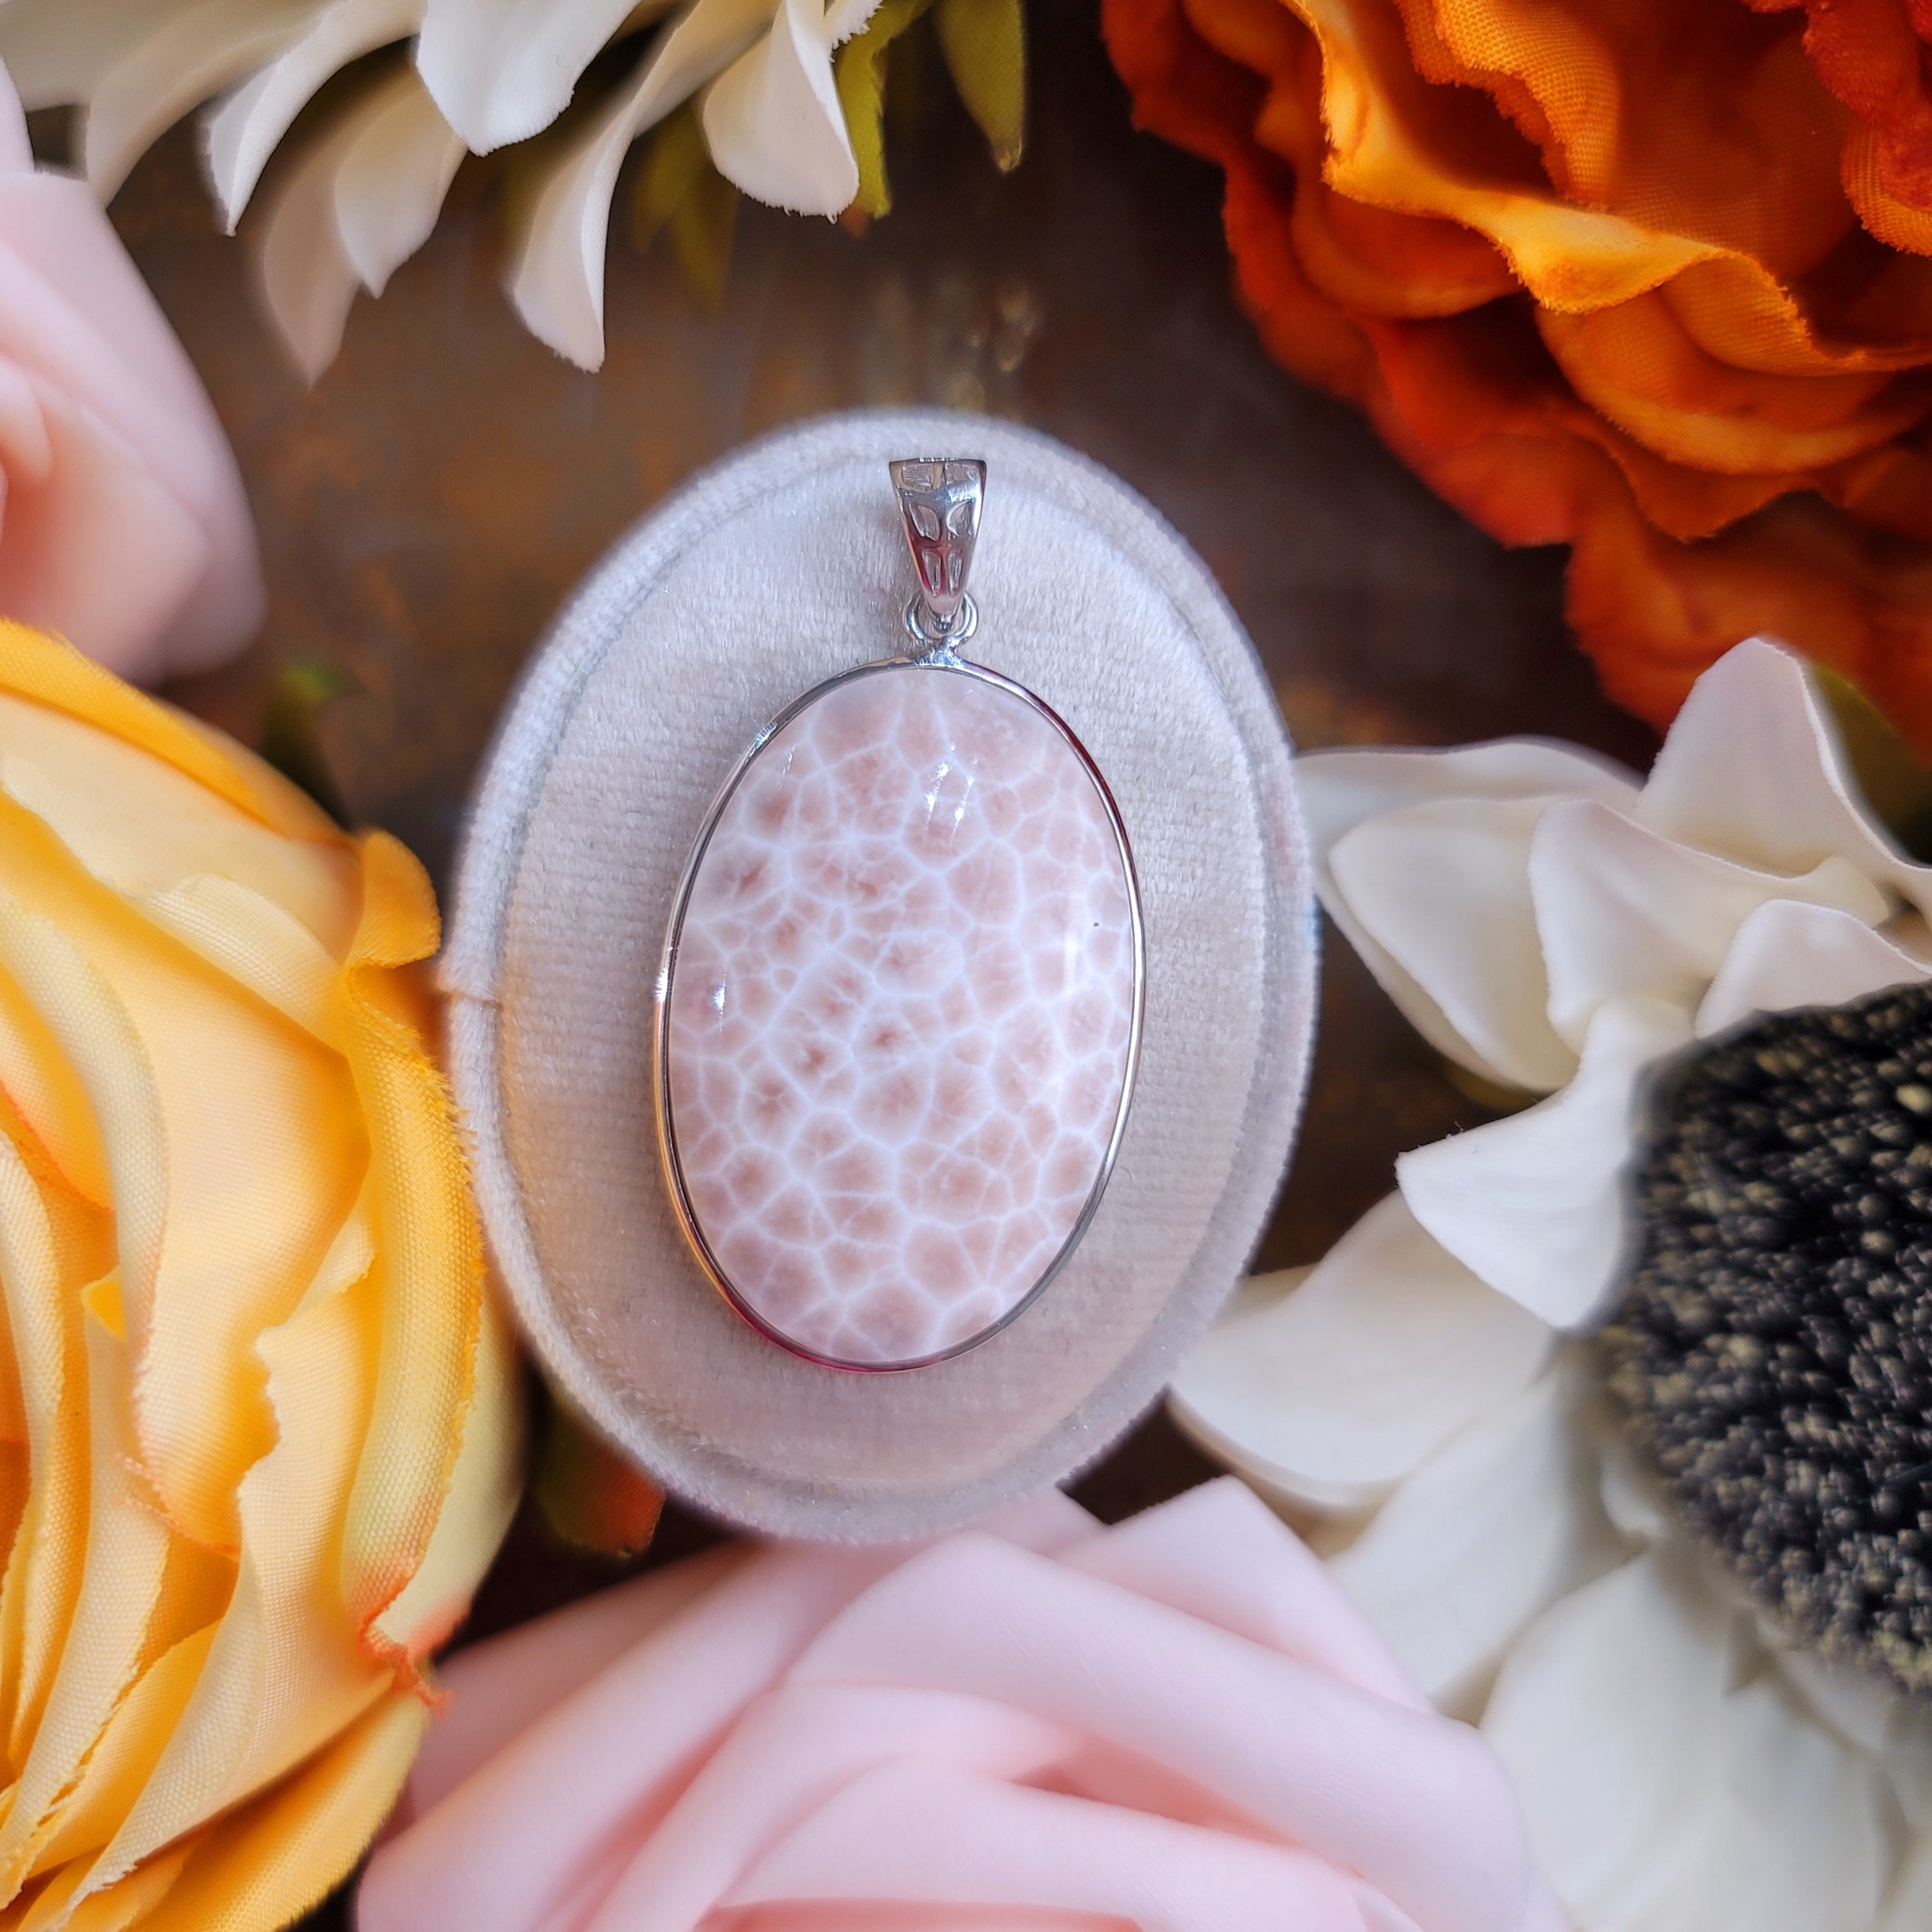 Natrolite Pendant .925 Silver for Channeling, Psychic Abilities and Awakening of your Third Eye Chakra.